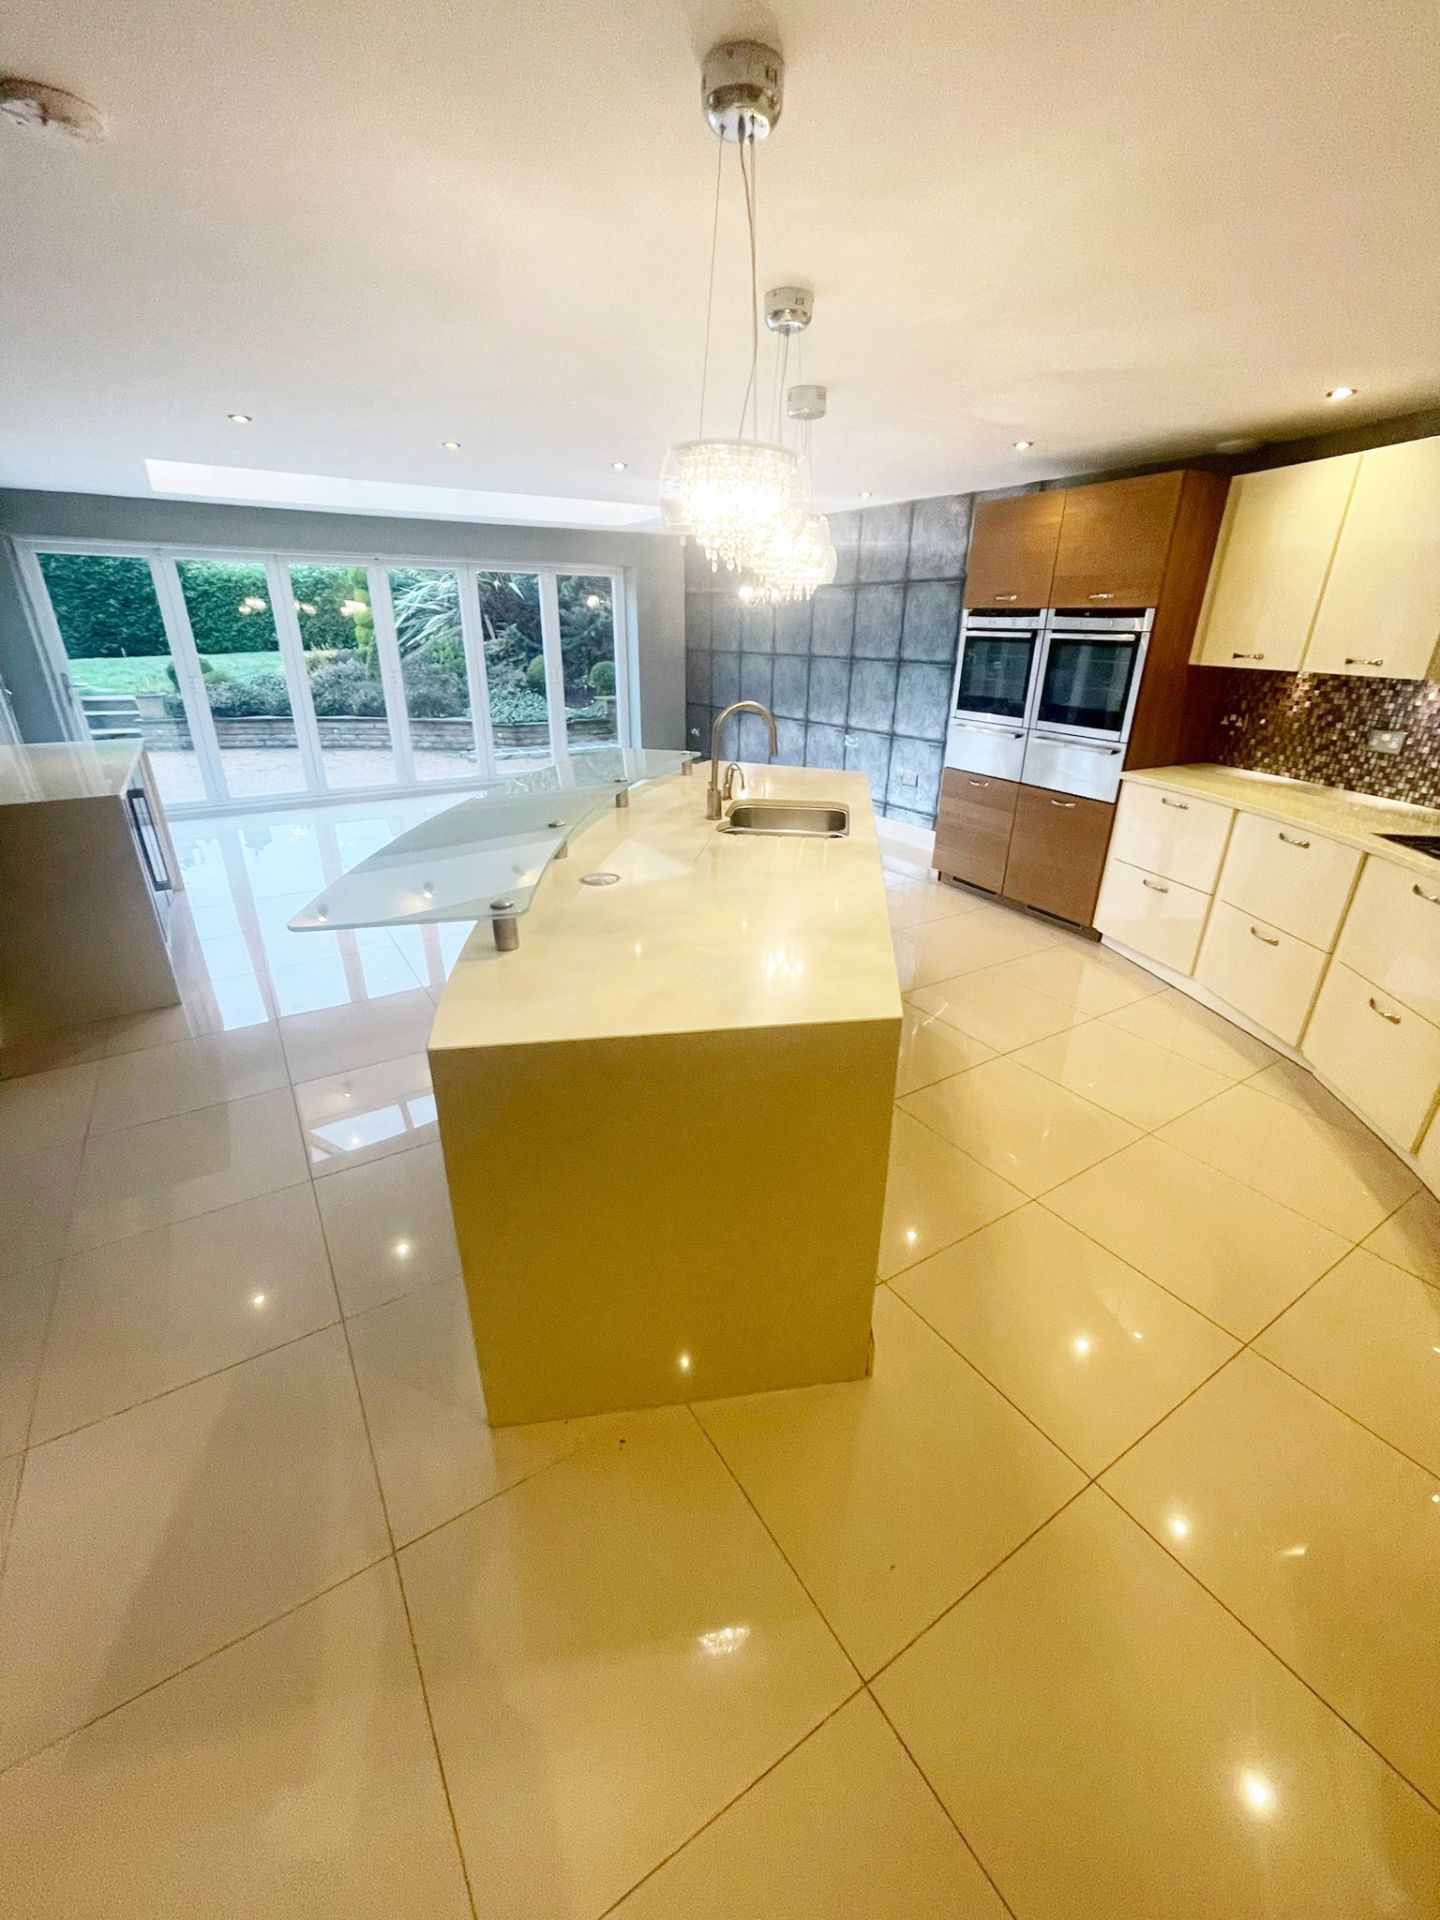 1 x Contemporary ALNO Fitted Kitchen With Branded  Appliances Created By Award Winning Kitchen - Image 27 of 89